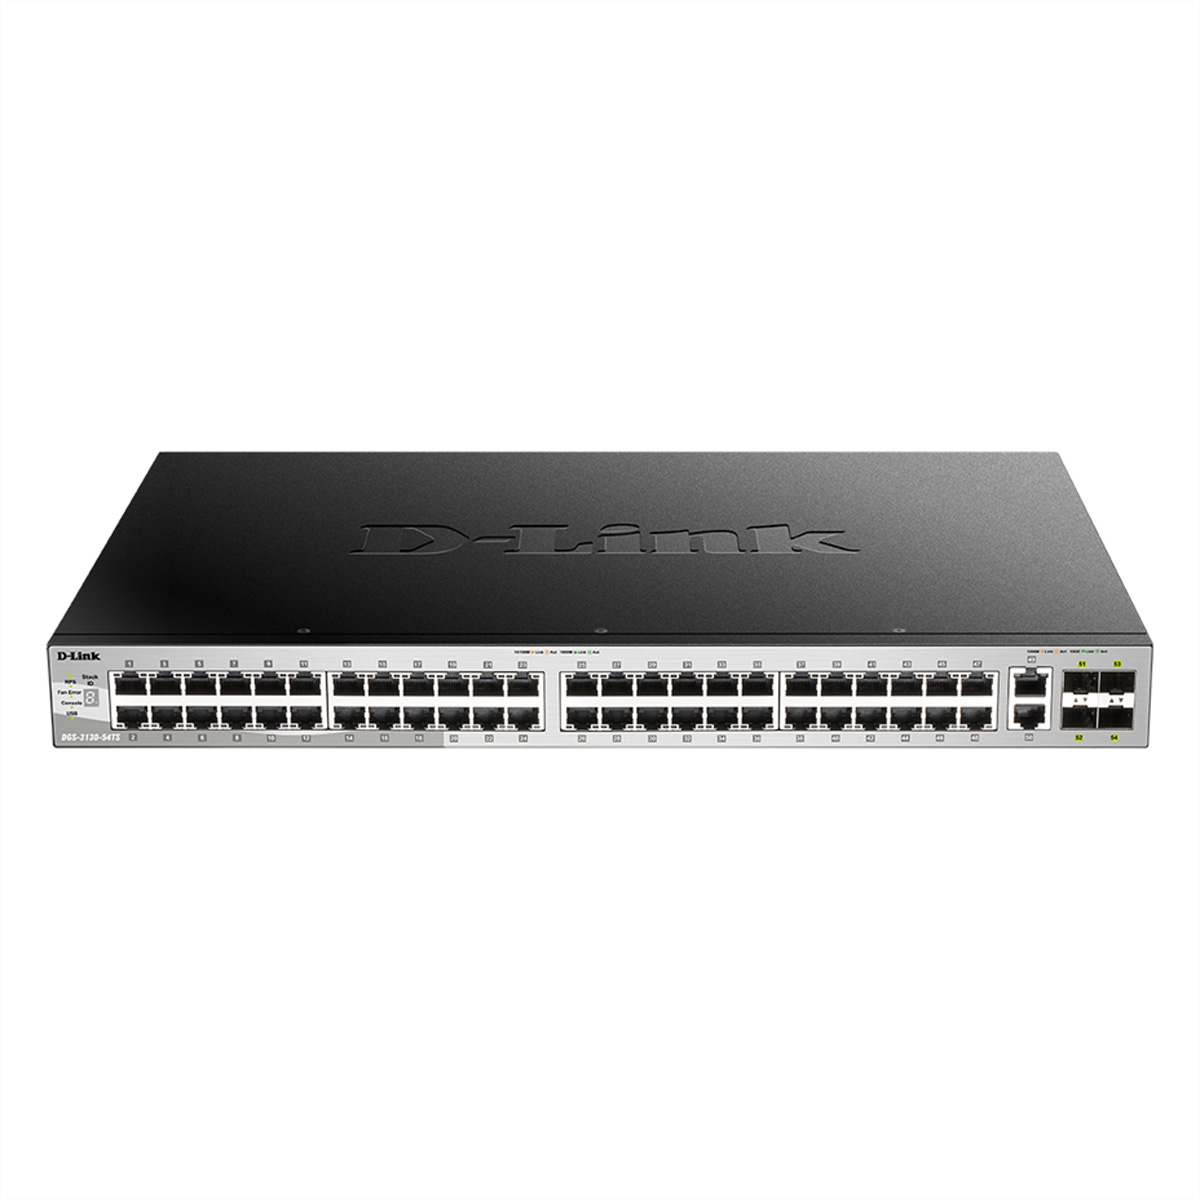 D-Link DGS-3130-54TS/E 54Port Switch, Layer 3 Gigabit Stack (SI)